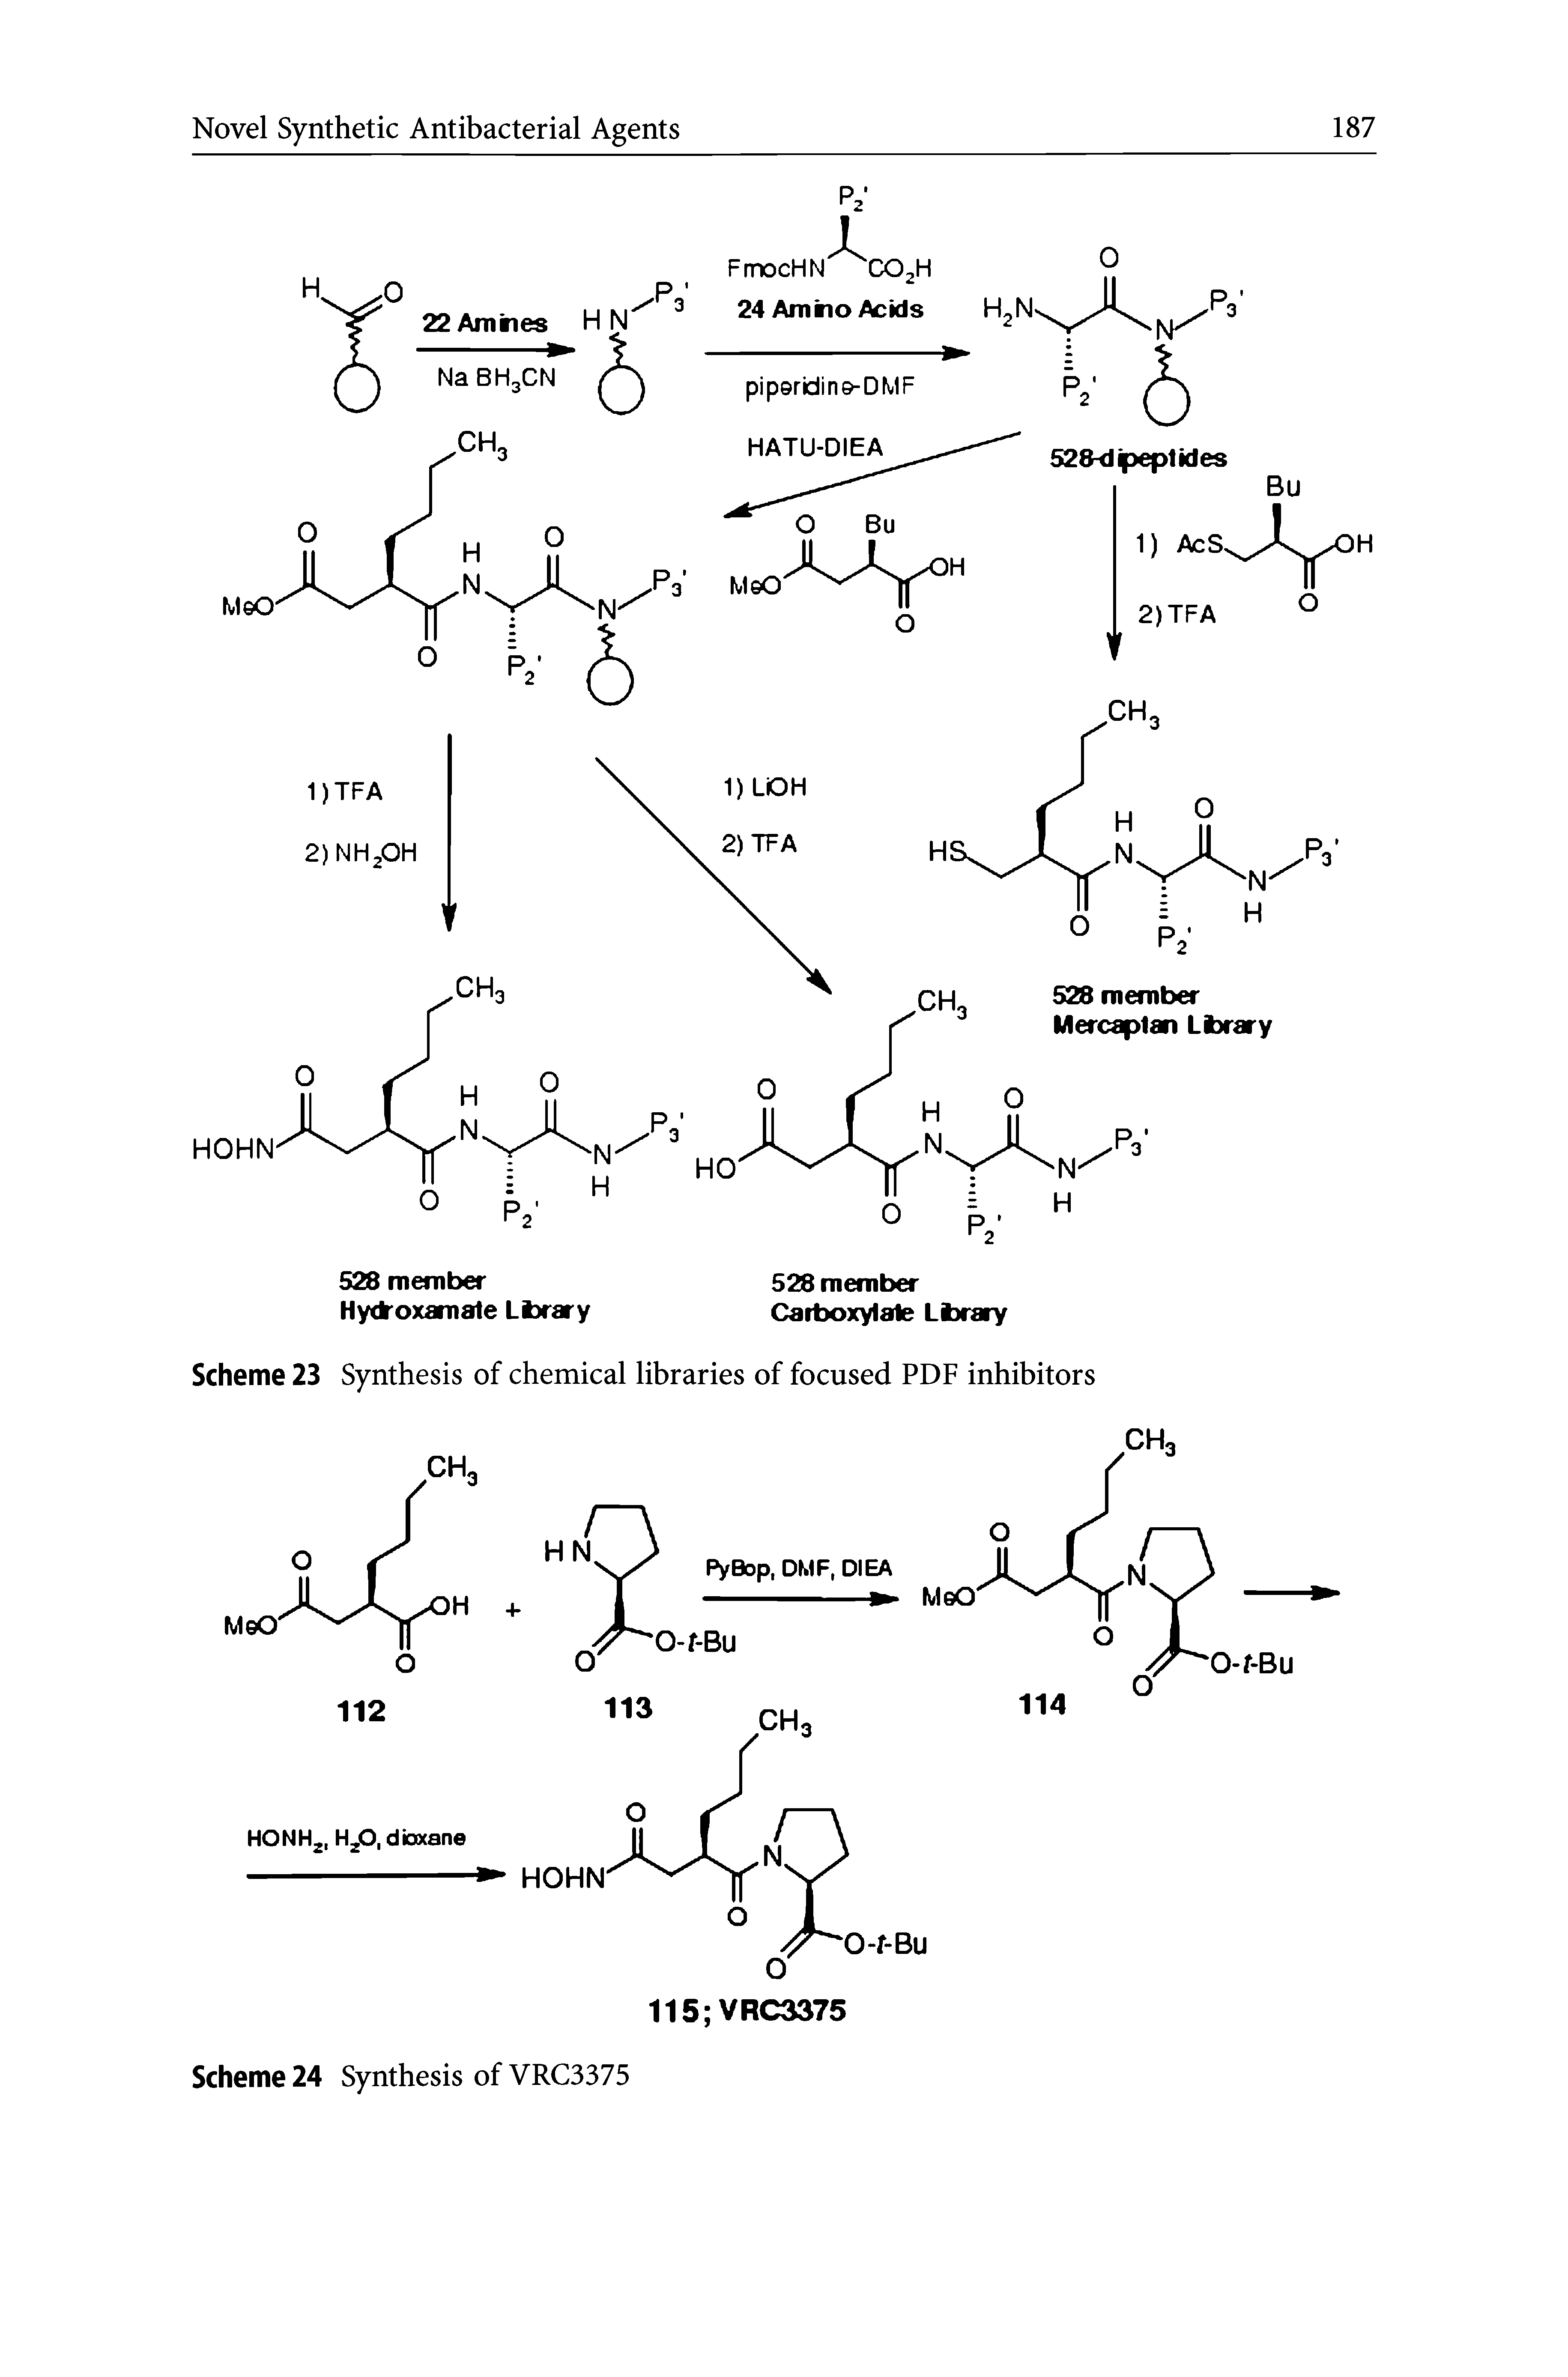 Scheme 23 Synthesis of chemical libraries of focused PDF inhibitors...